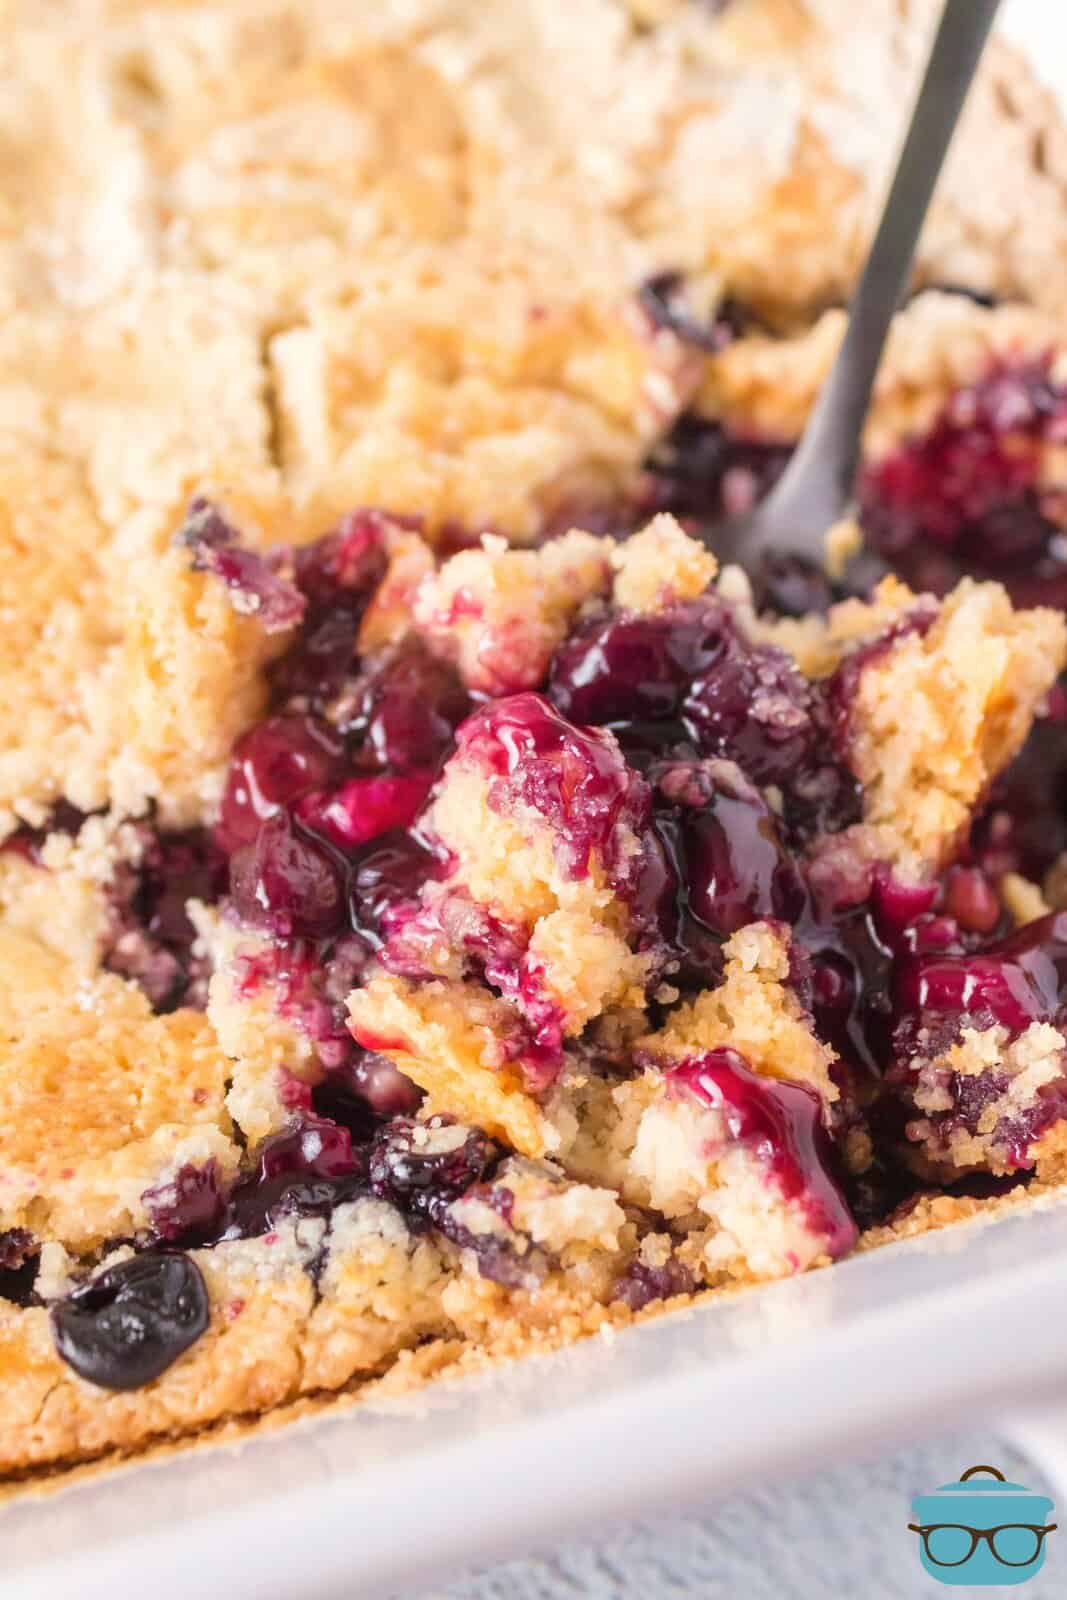 A serving utensil getting a serving of Blueberry Dump Cake out of the dish.